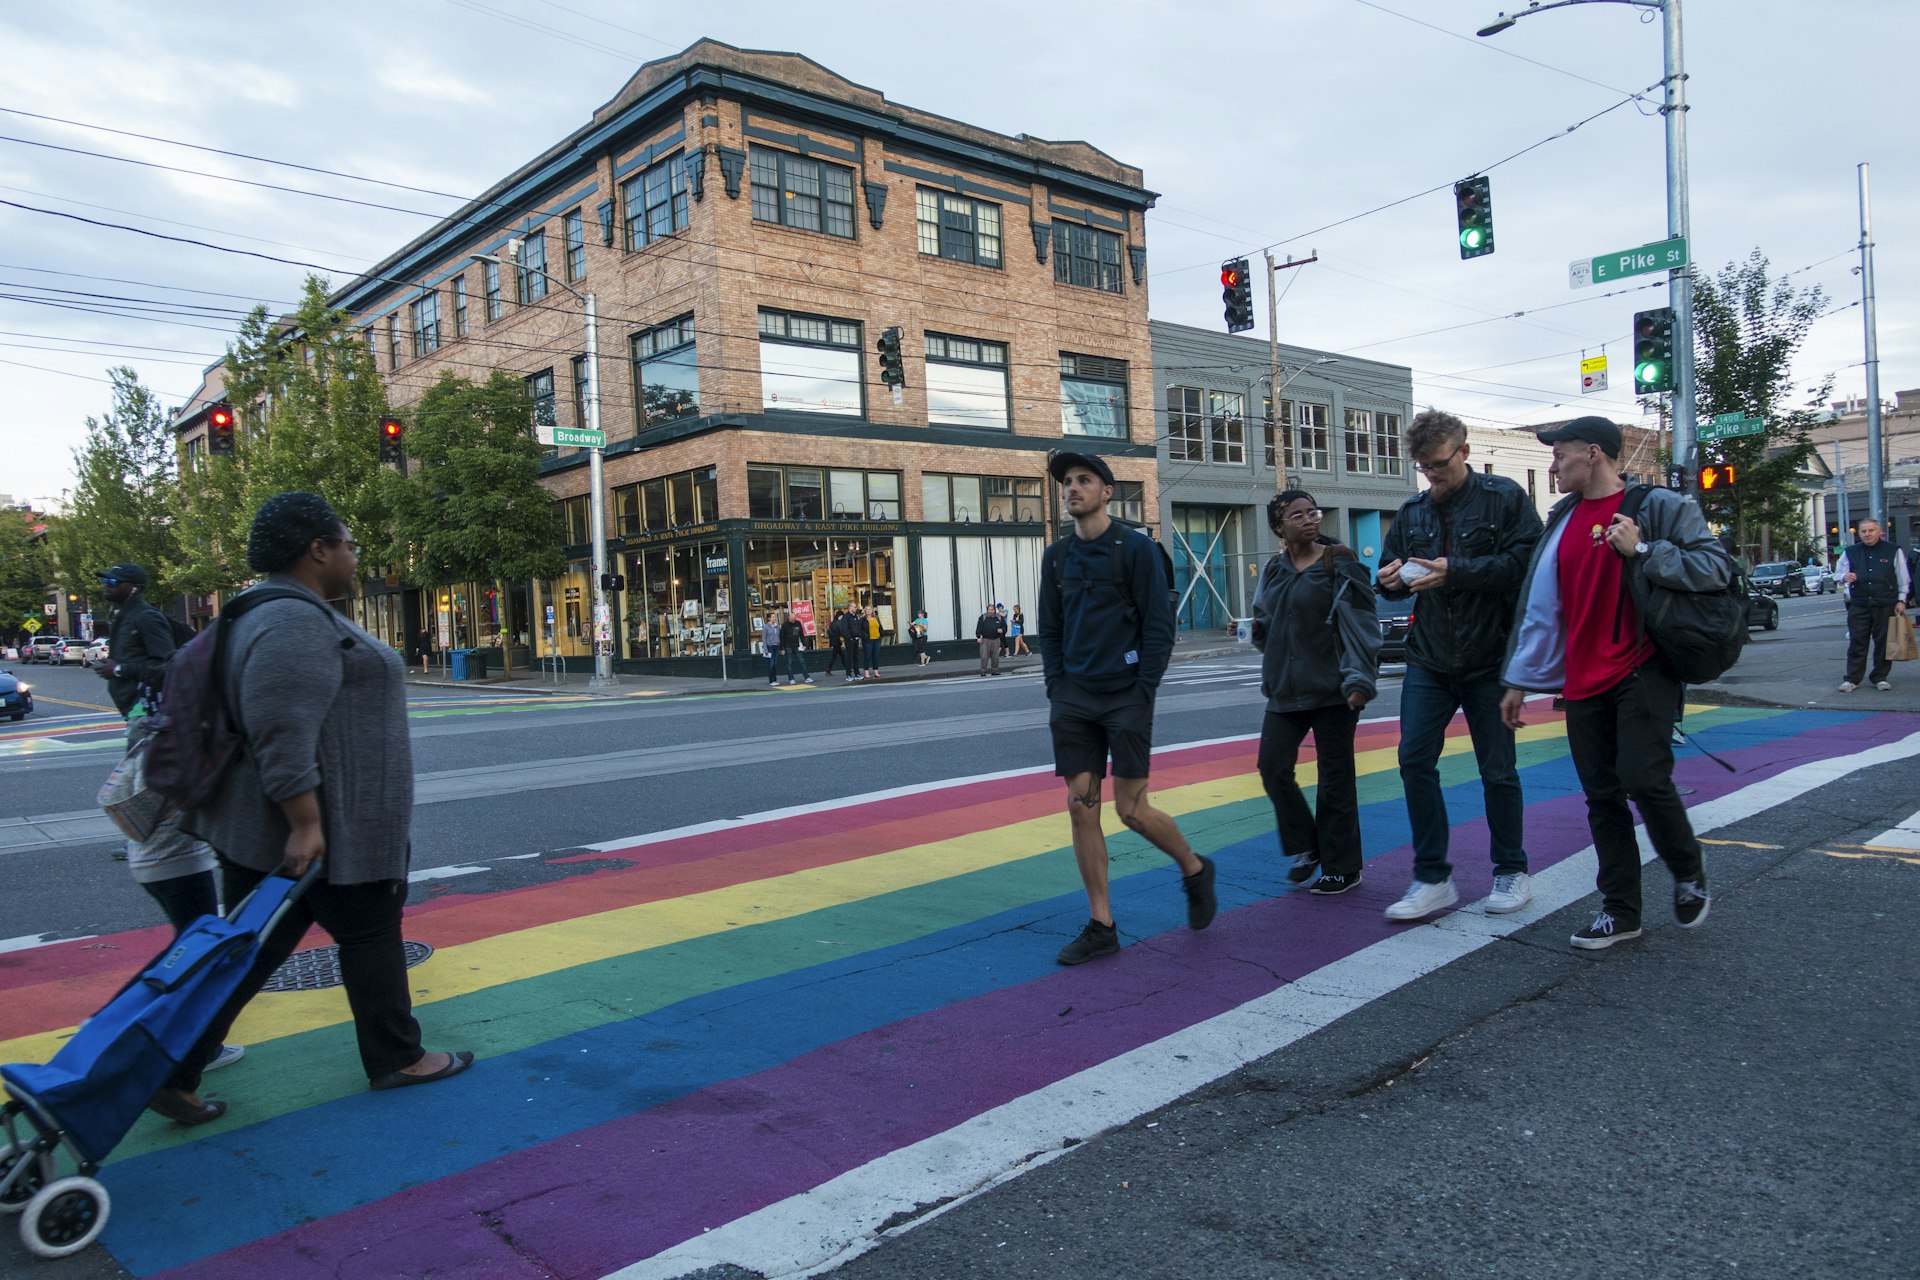 Pedestrians cross the street on a rainbow crosswalk on Capitol Hill at the Corner of East Pike St and Broadway